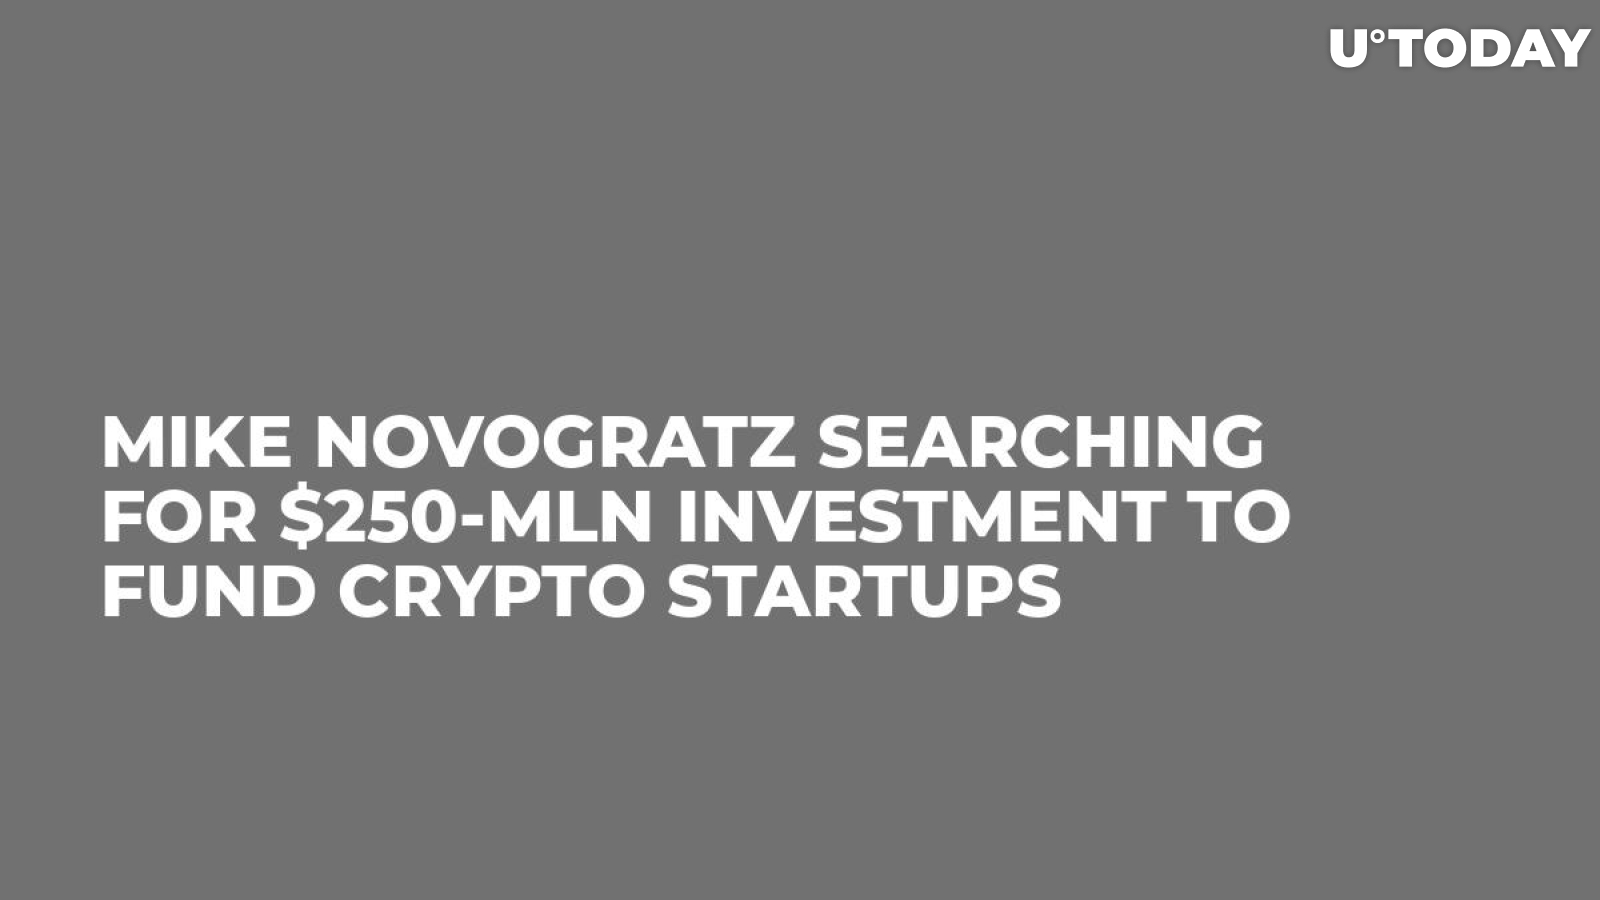 Mike Novogratz Searching for $250-Mln Investment to Fund Crypto Startups